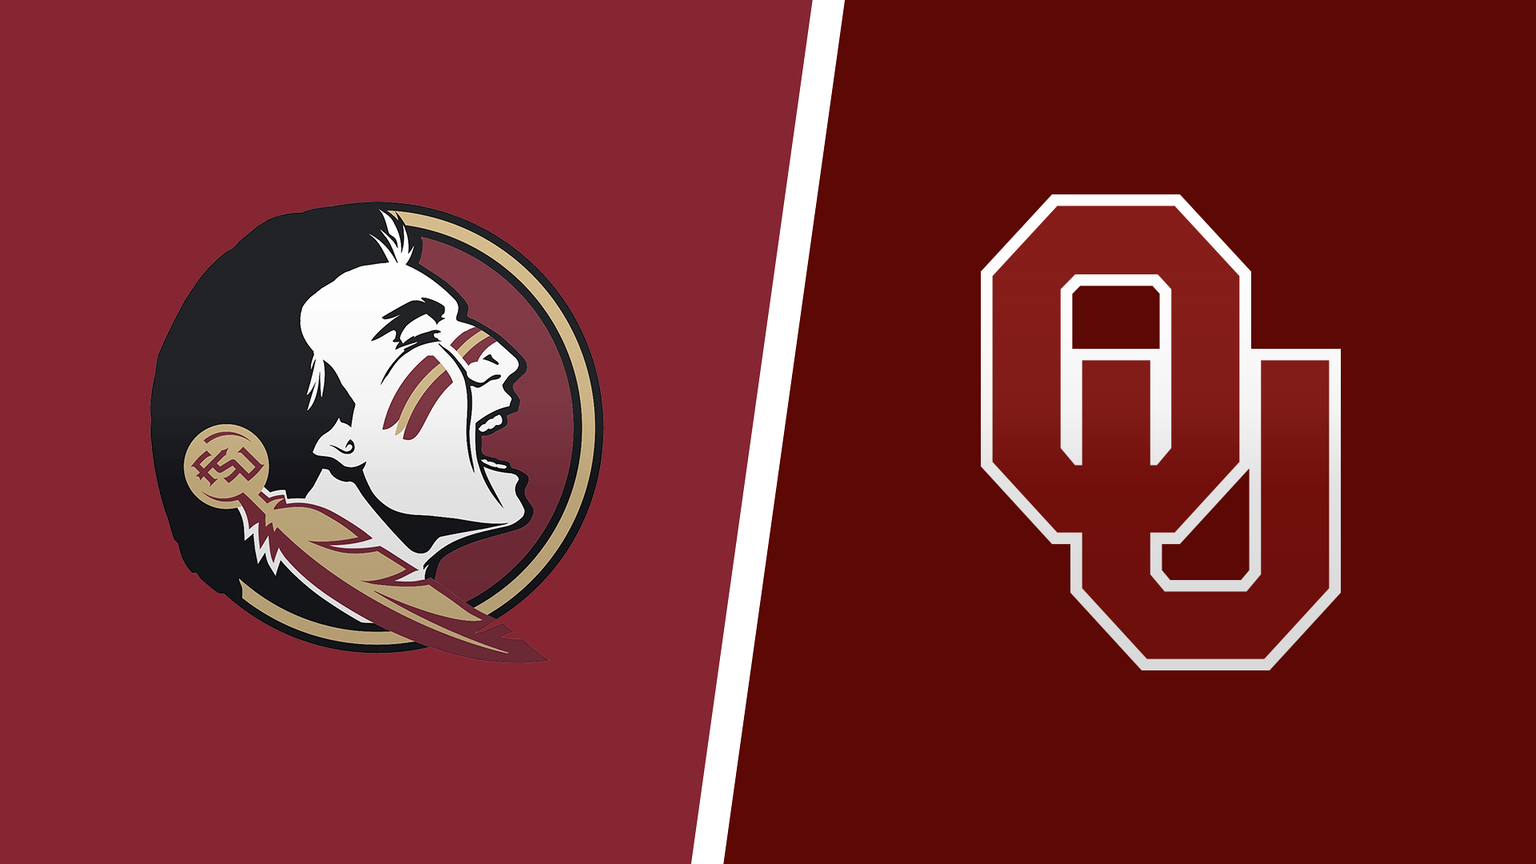 How to Watch 2022 CheezIt Bowl Oklahoma vs. Florida State Game Live